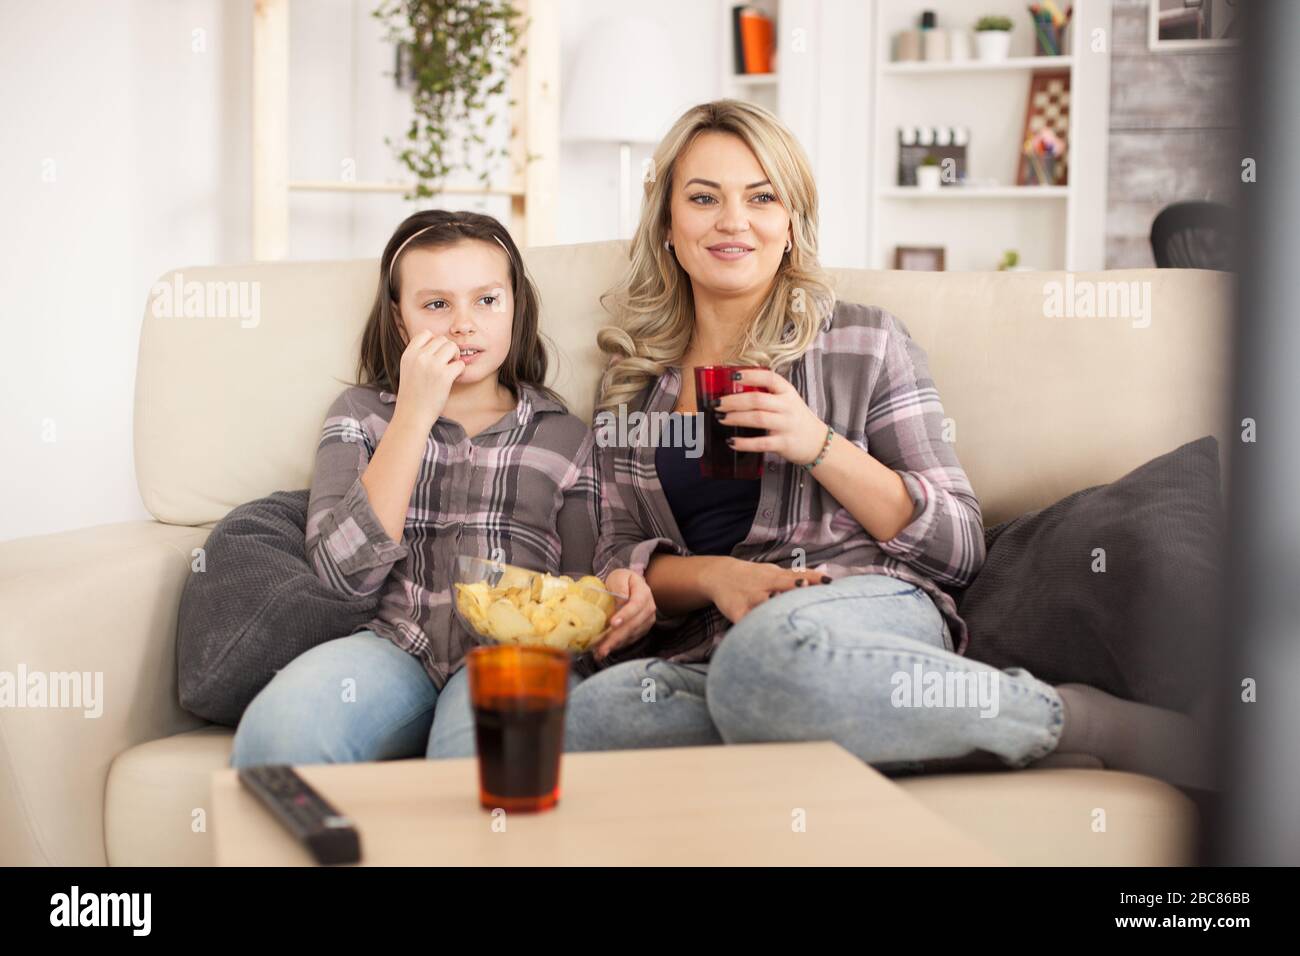 Mother and daughter watching a movie sitting on the couch on a lazy day eating chips and drinking soda. Stock Photo